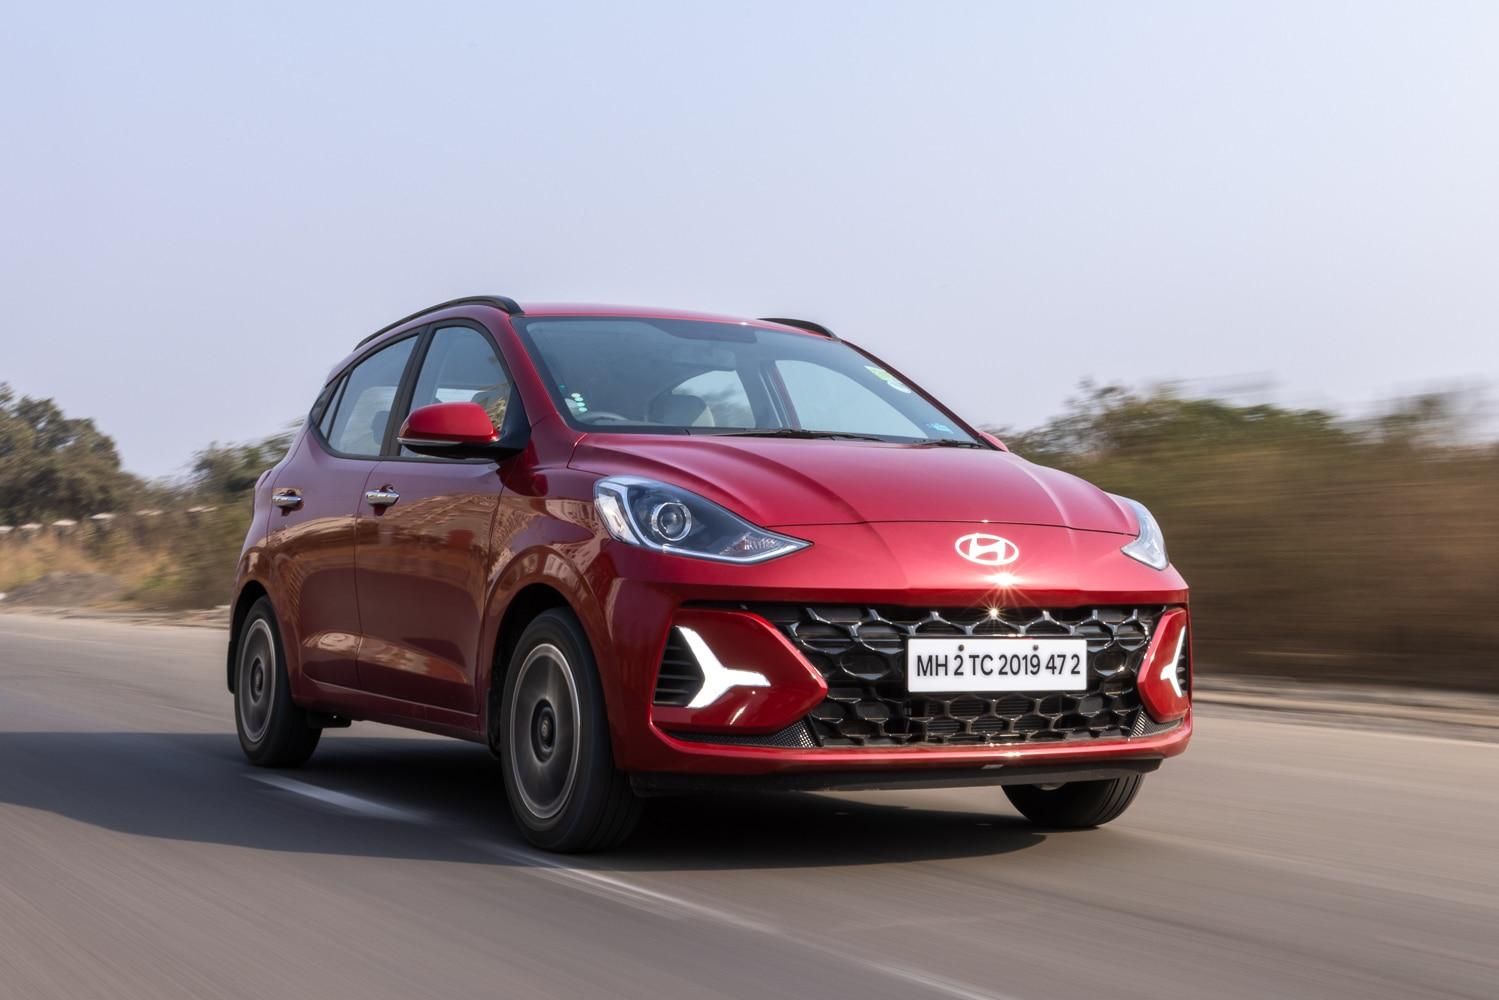 Facelifted Hyundai Grand i10 Nios Review - Changes Make It Better?